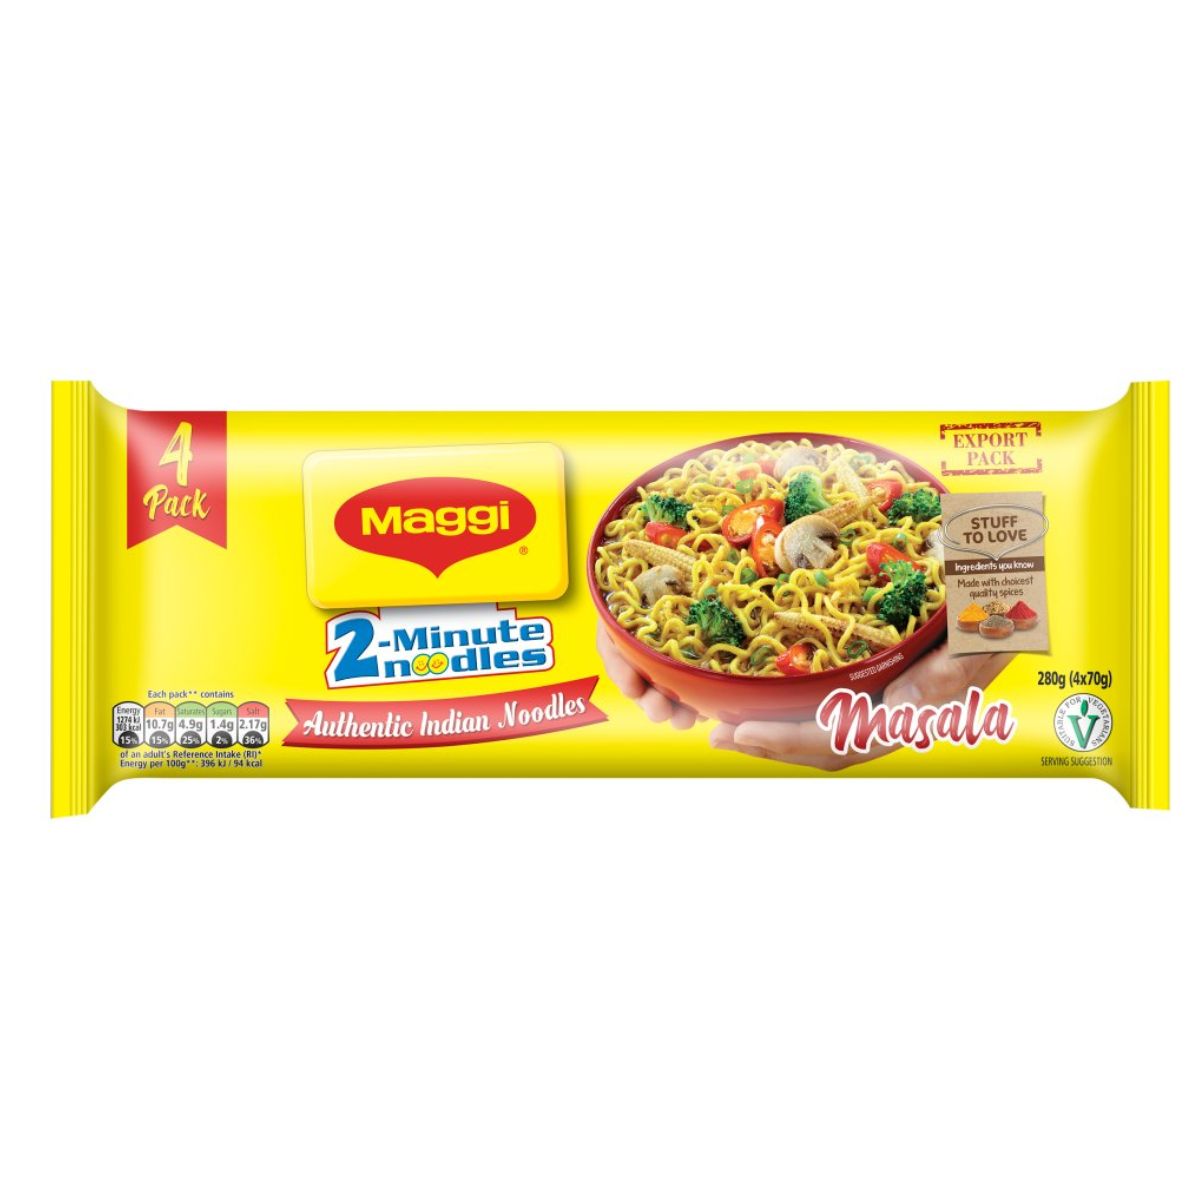 Package of Maggi - 2 Minute Authentic Indian Masala Spicy Noodles Multipack - 280g, showing a bowl of noodles with vegetables on the front. Text indicates it contains 4 packs and is labeled "Authentic Indian Noodles.